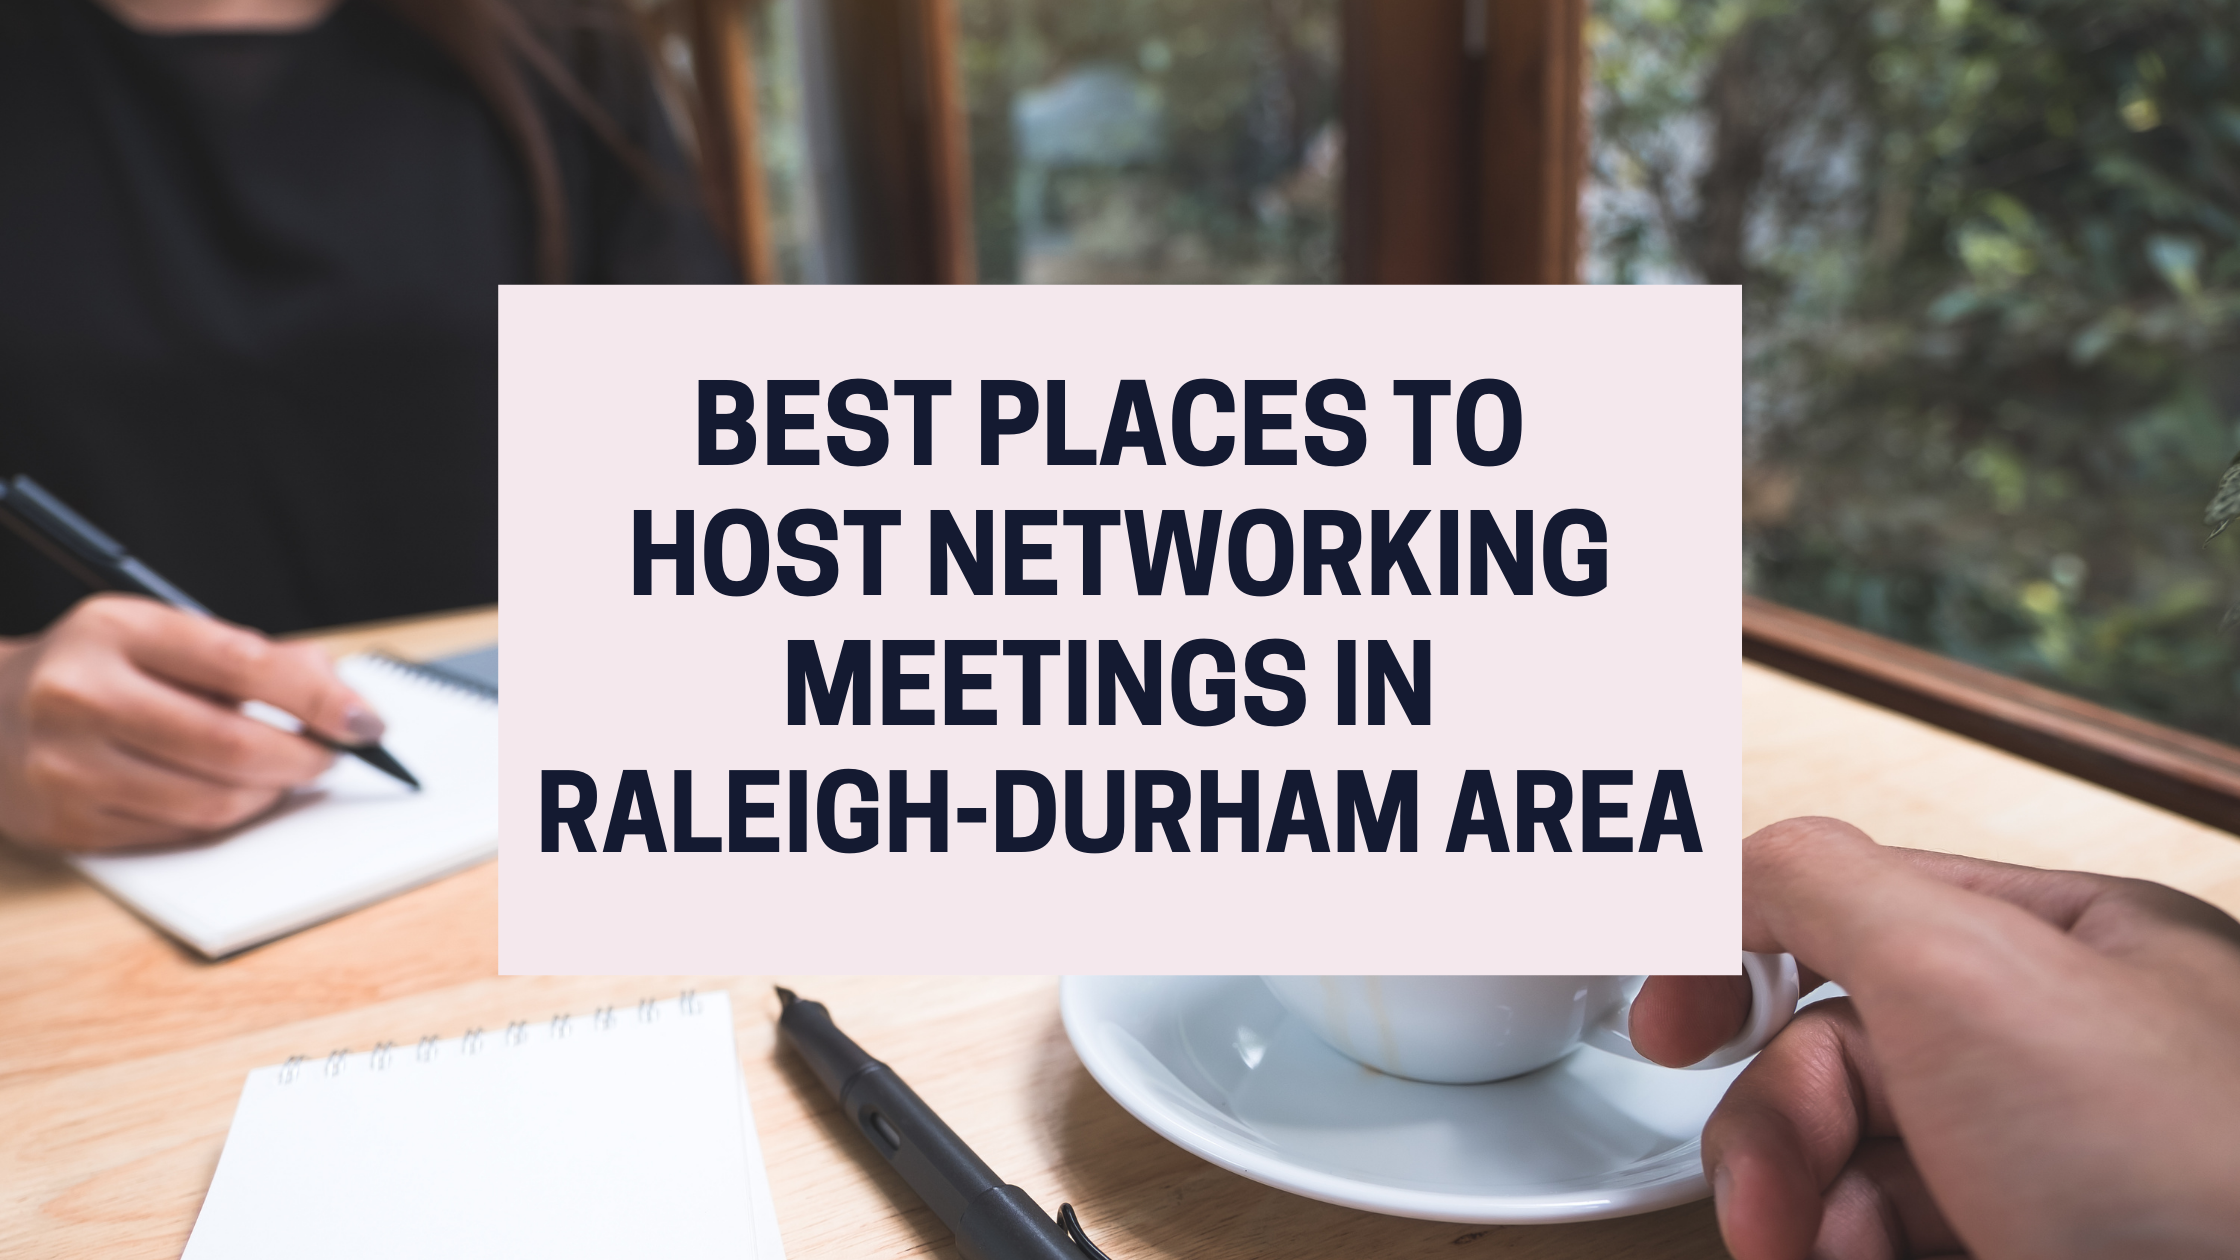 Host Networking Meeting in Raleigh-Durham area